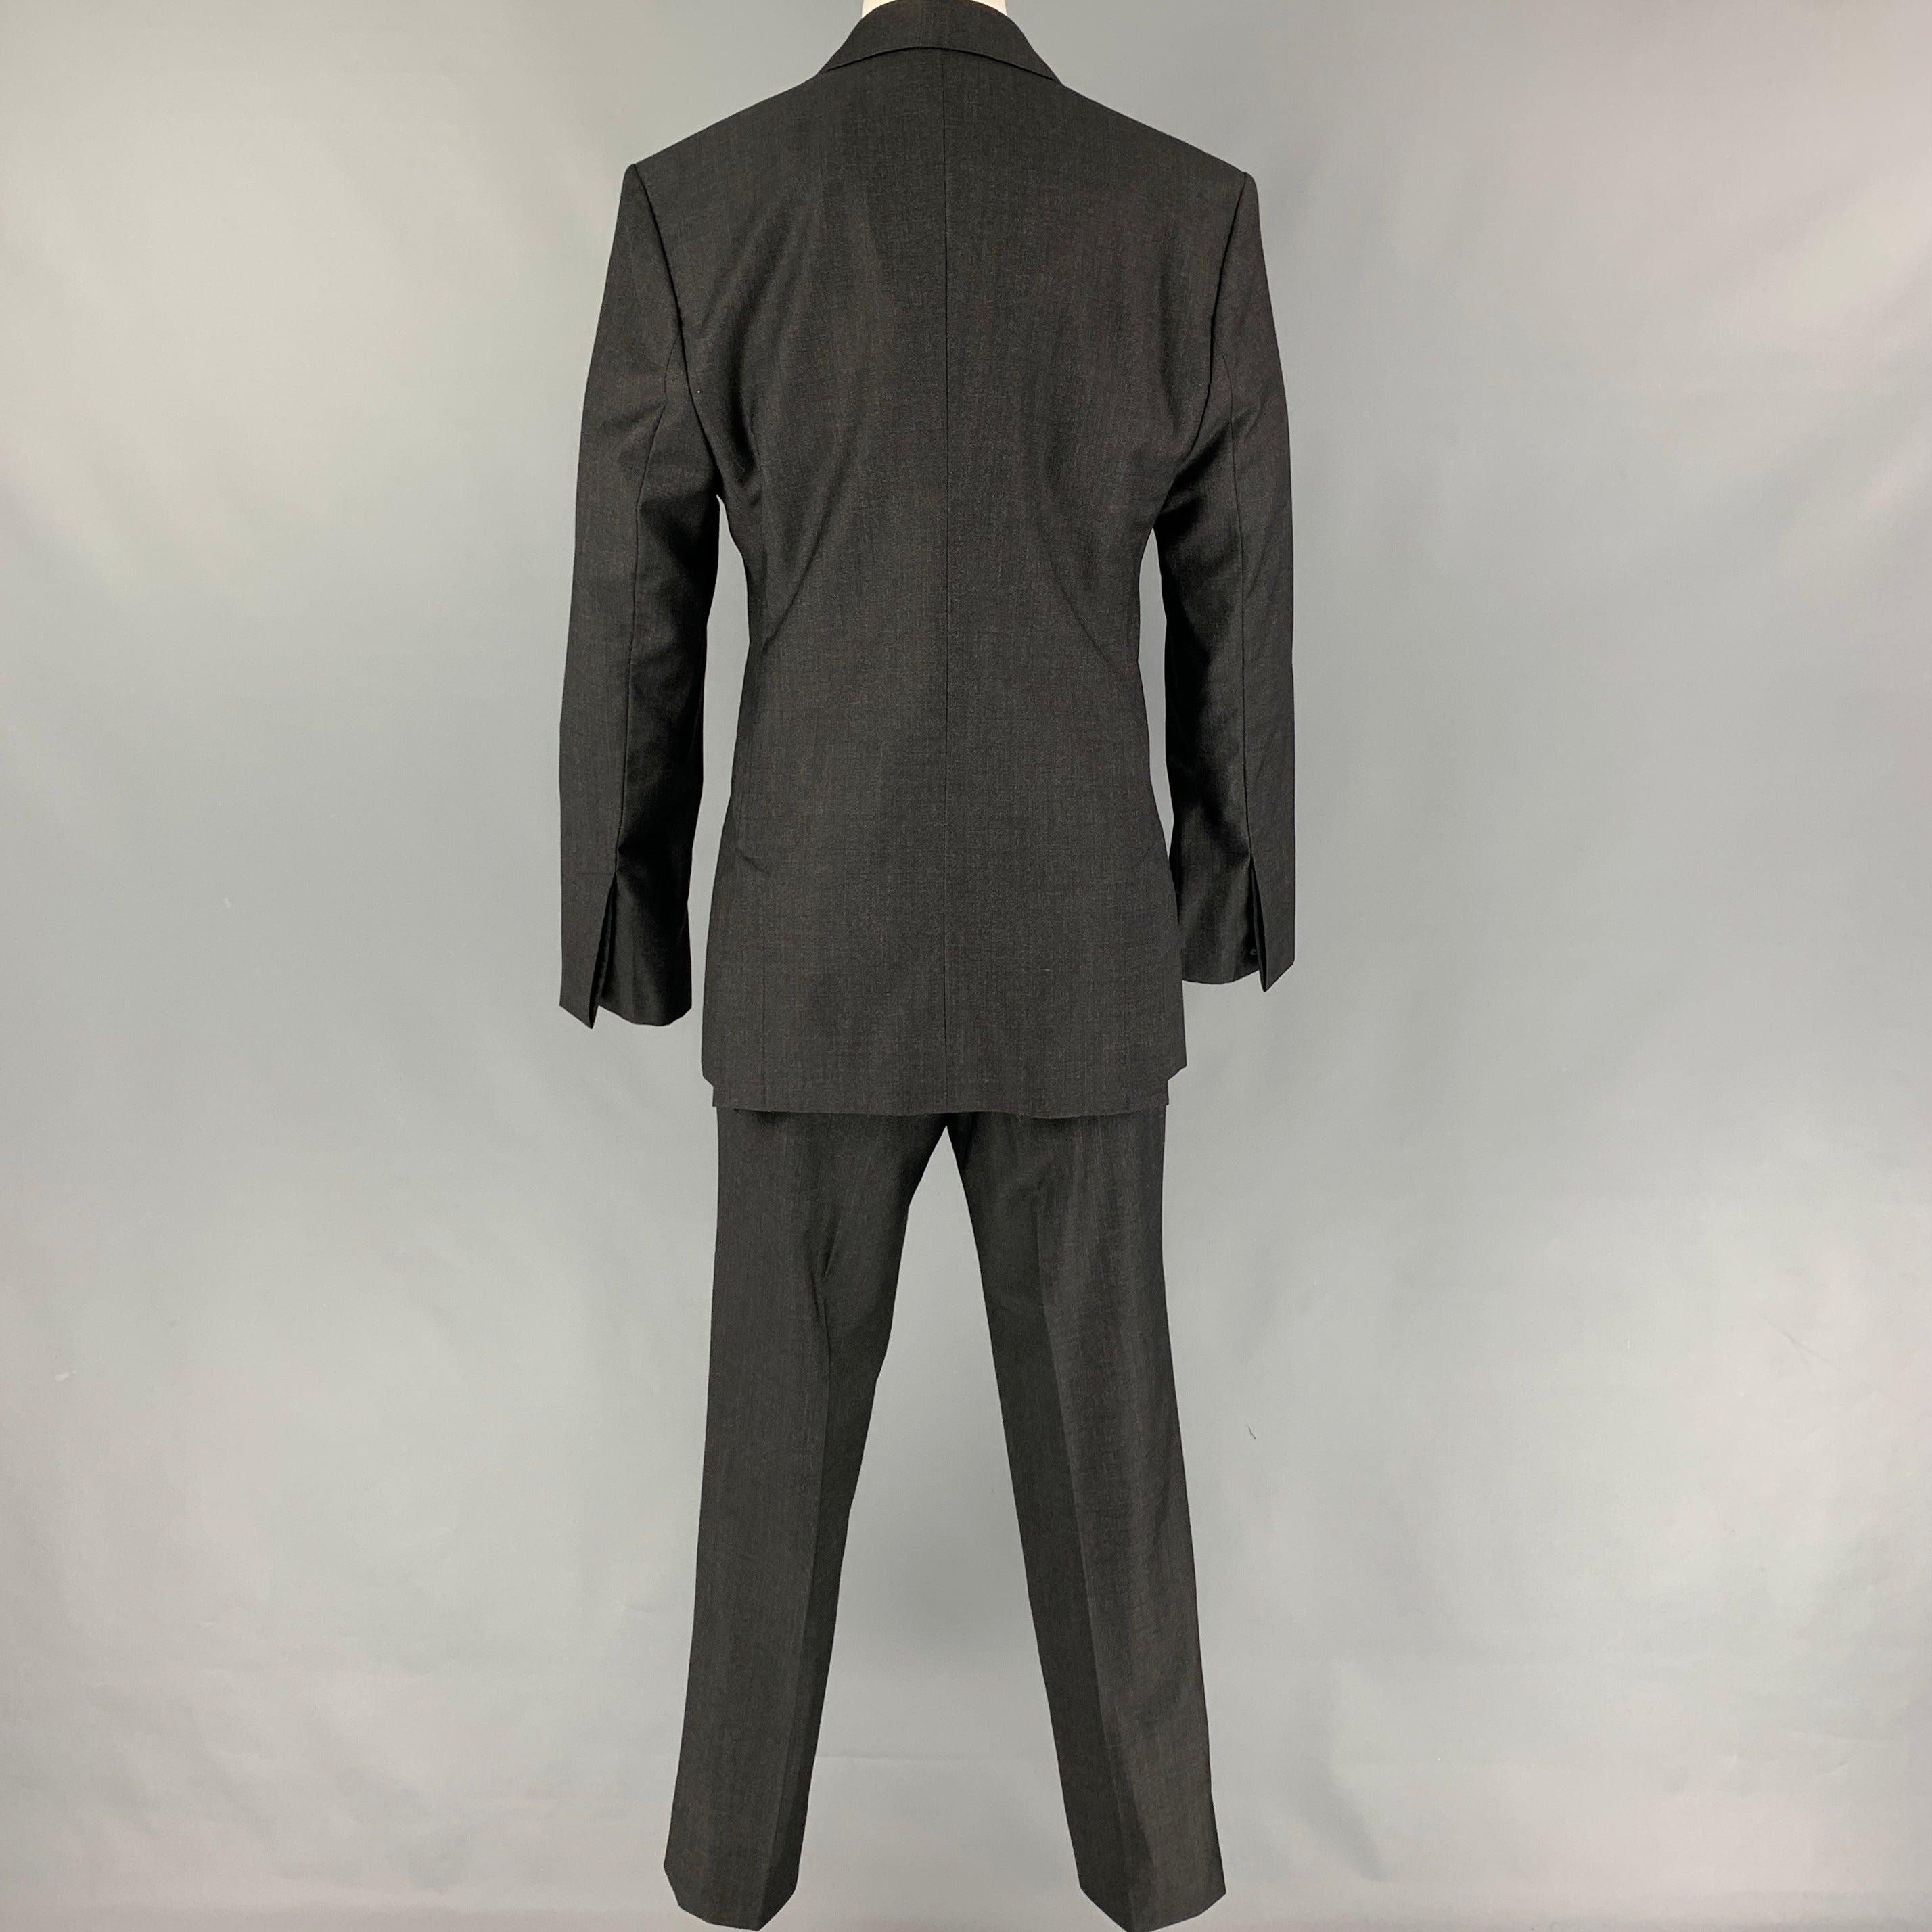 EMPORIO ARMANI Size 36 Charcoal Wool Peak Lapel Suit In Good Condition For Sale In San Francisco, CA